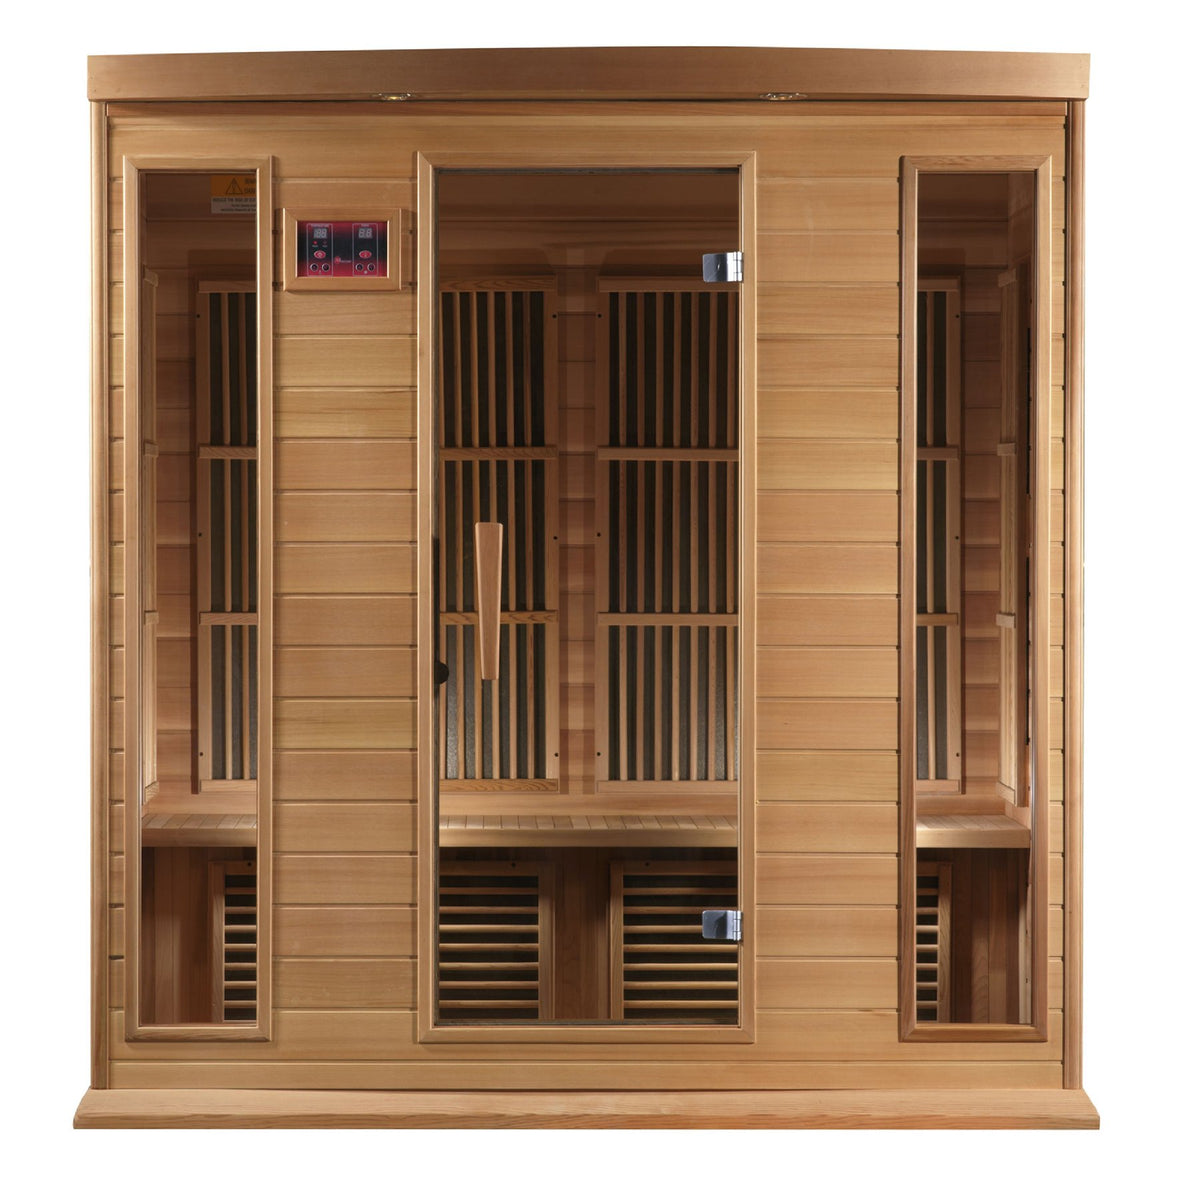 Maxxus 4 Person Low EMF Infrared Sauna (Canadian Red Cedar) - Promo code "75off" for $75 Discount / Ships in 2 Days